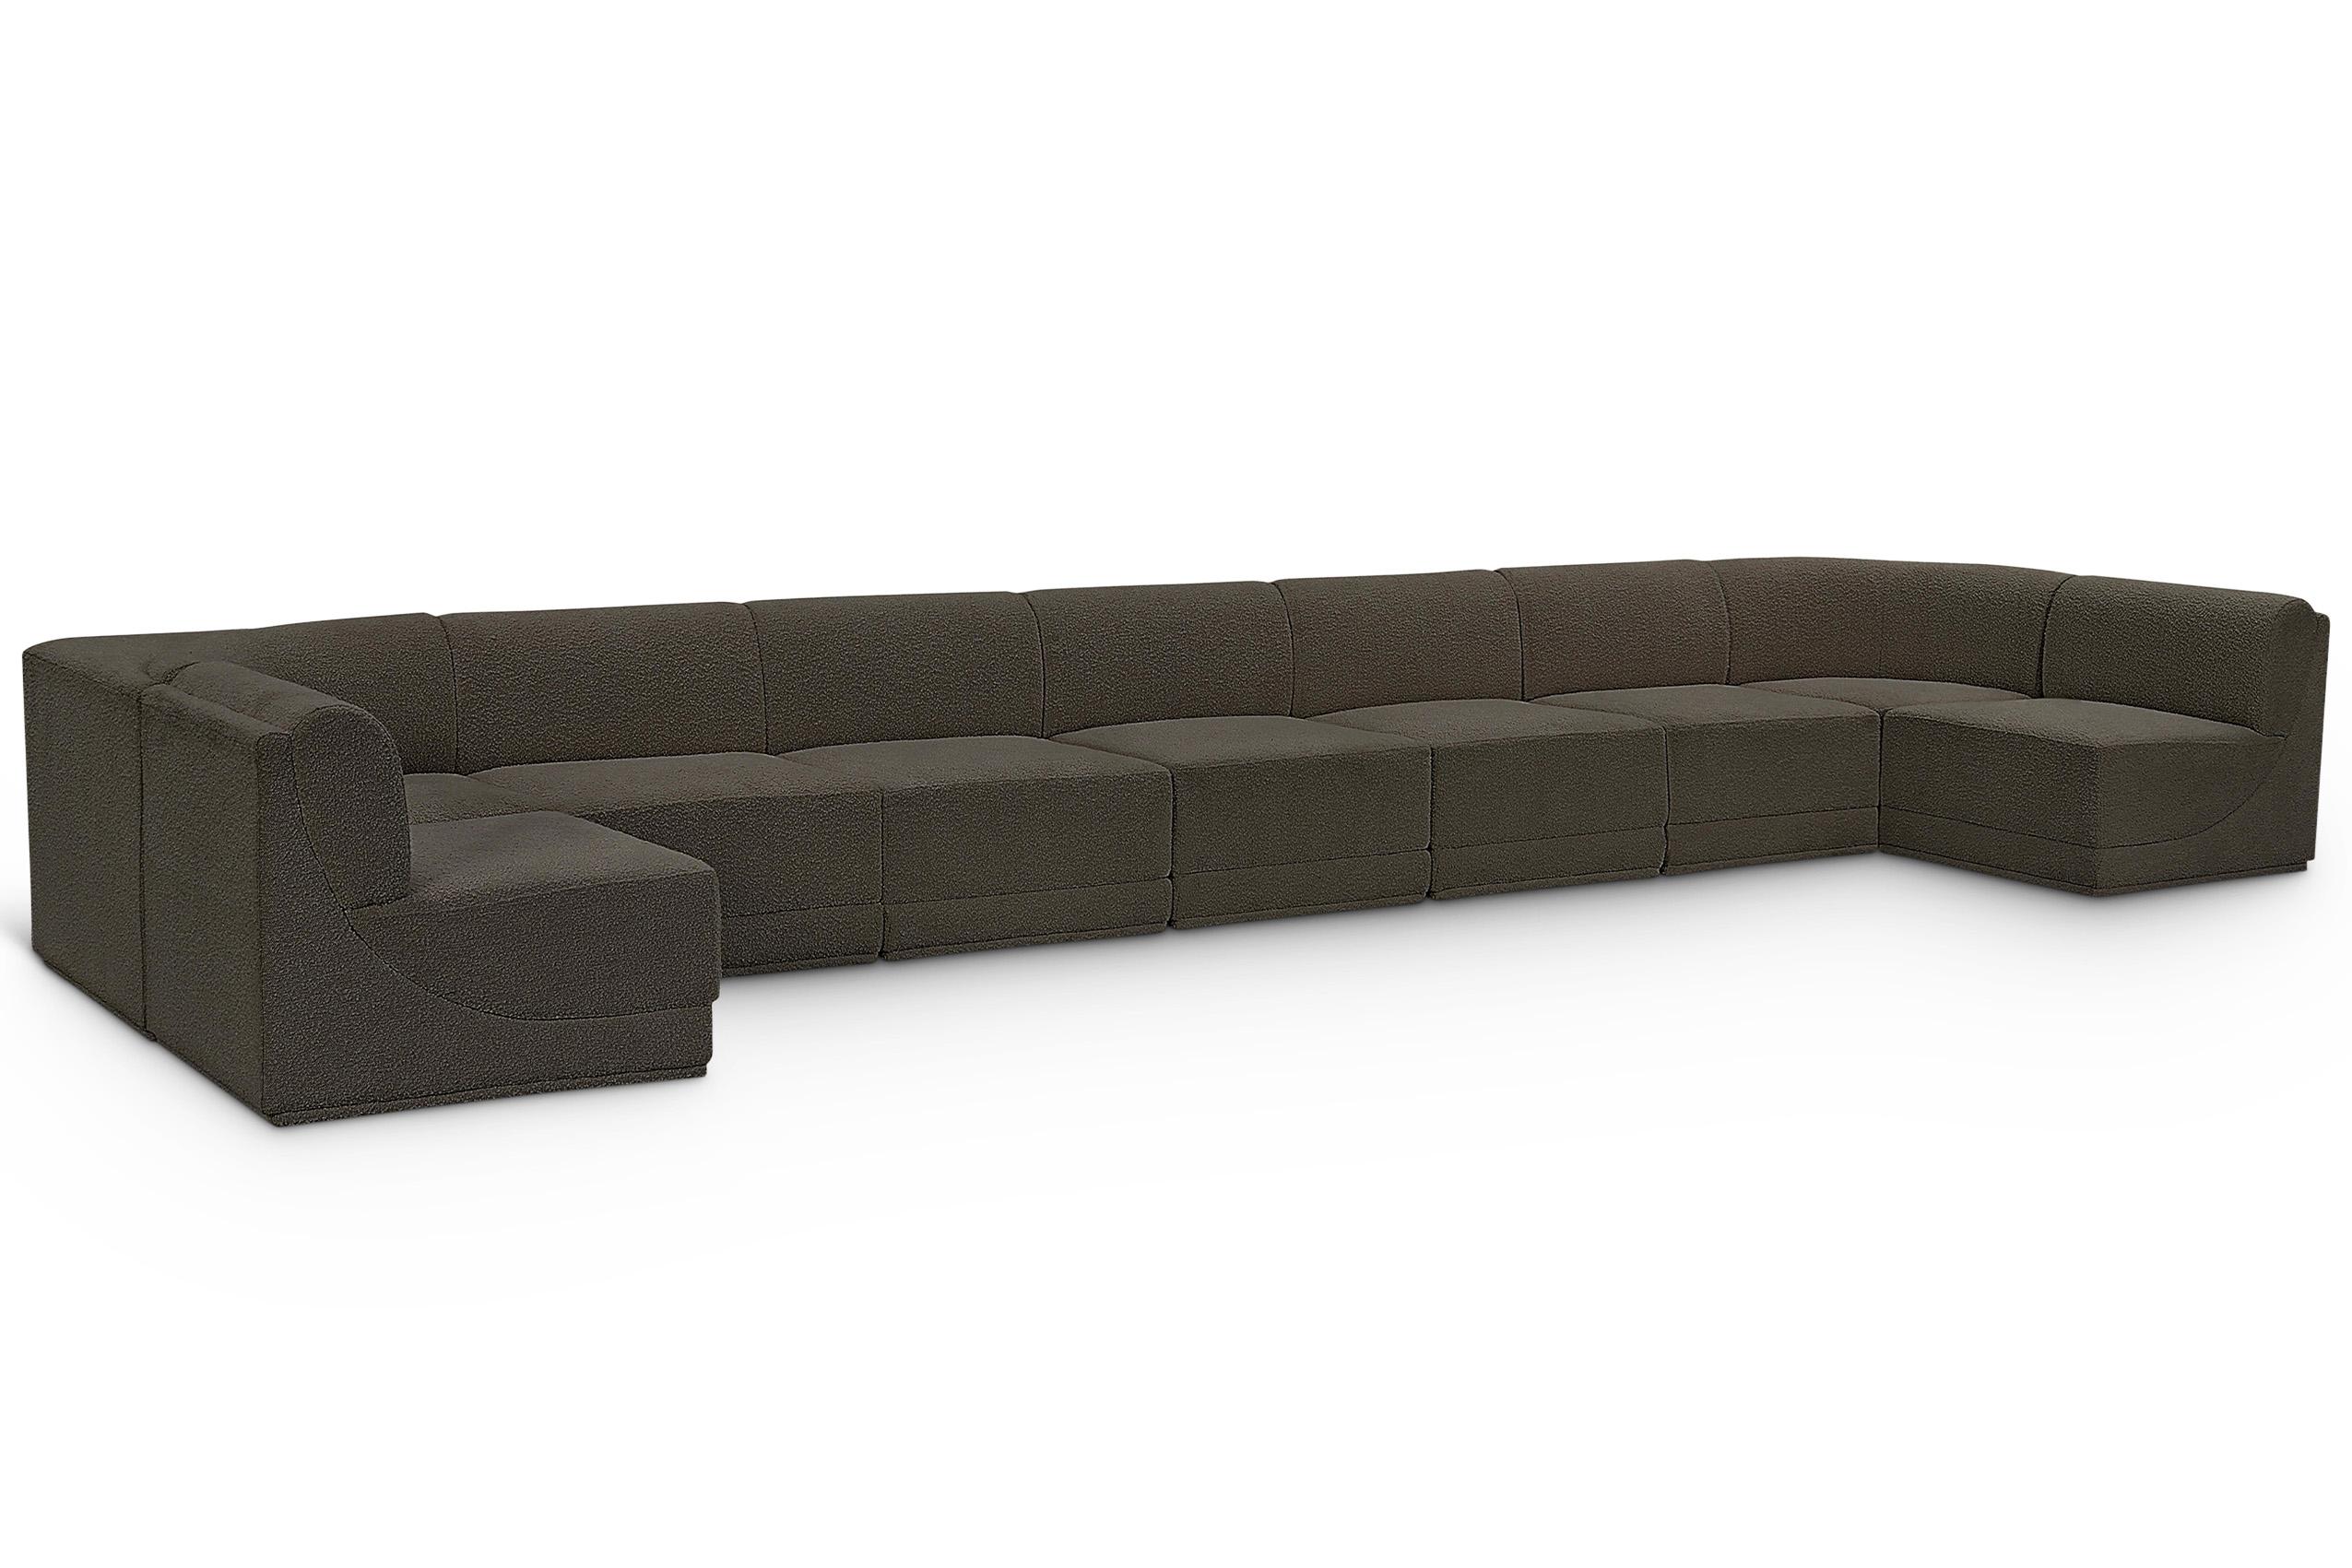 Contemporary, Modern Modular Sectional Ollie 118Brown-Sec9A 118Brown-Sec9A in Brown 